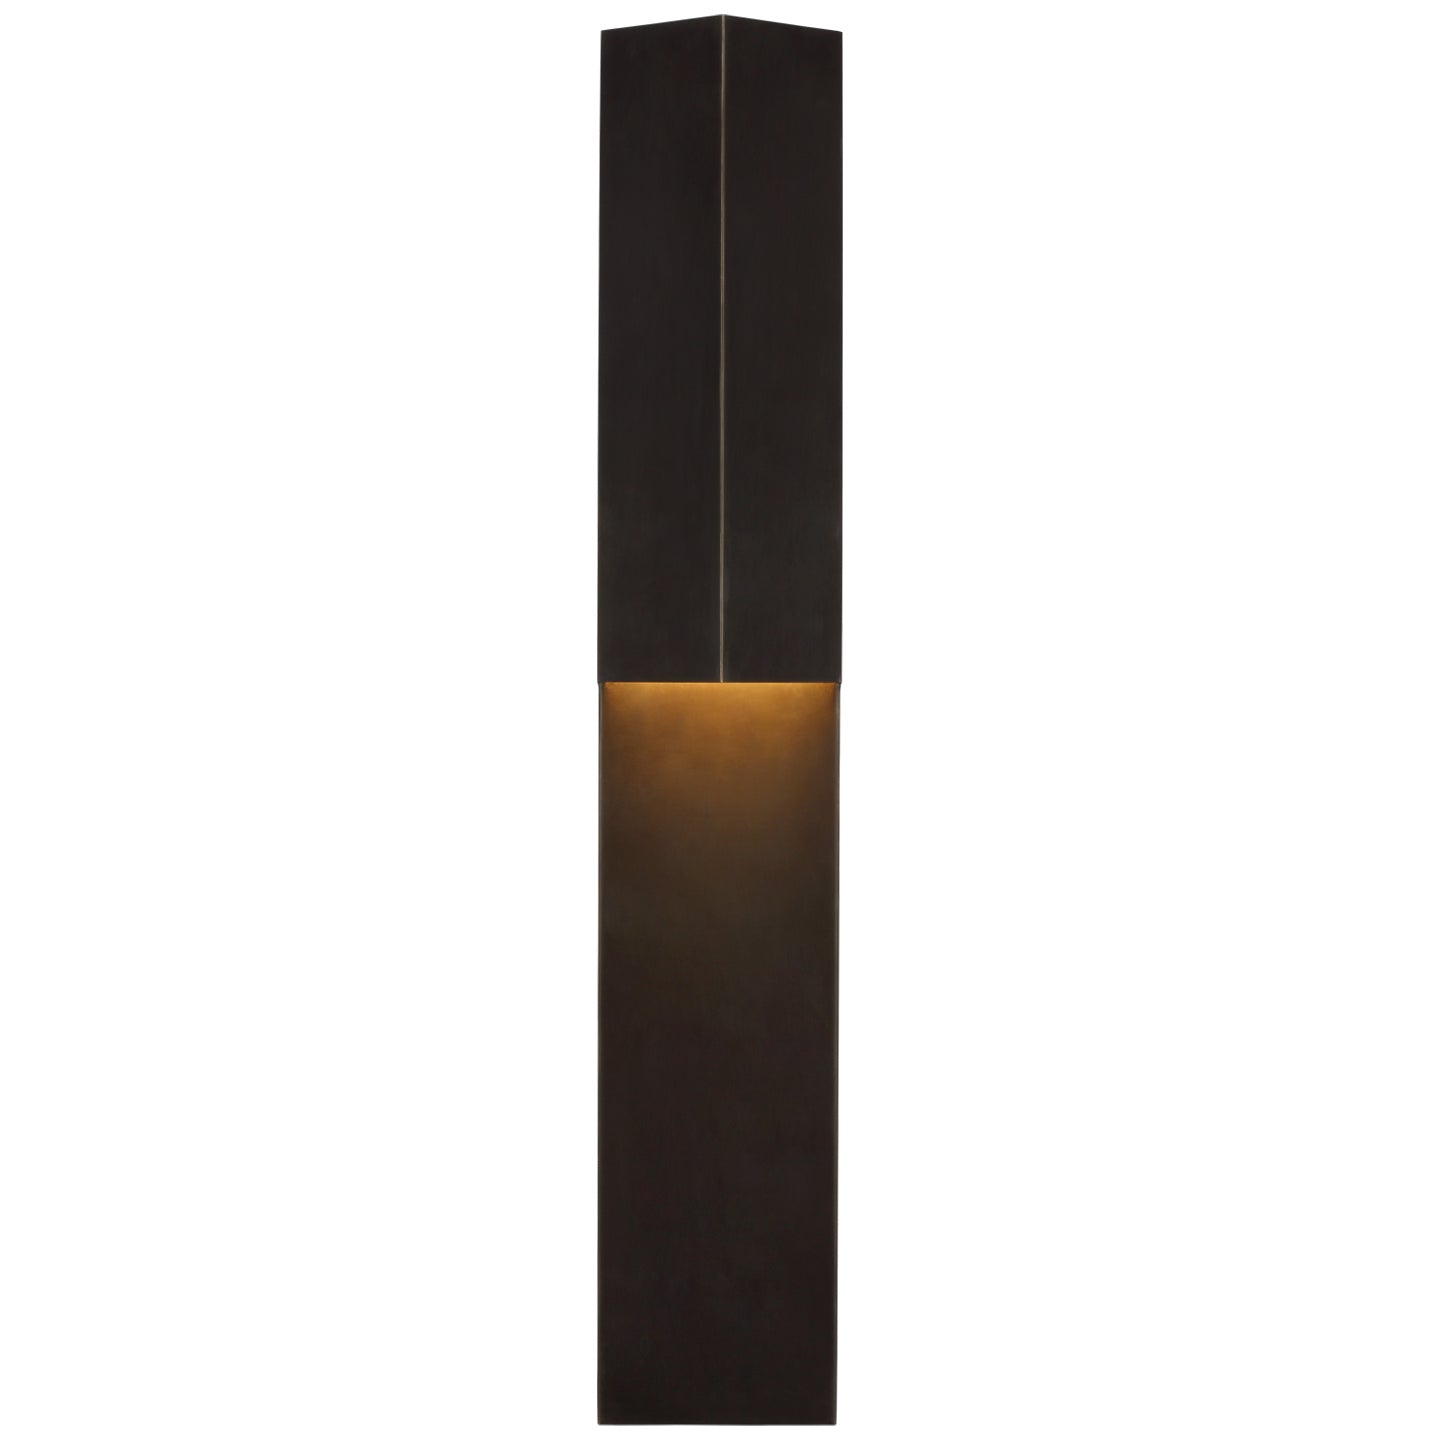 Load image into Gallery viewer, Visual Comfort Signature - KW 2783BZ - LED Outdoor Wall Sconce - Rega - Bronze
